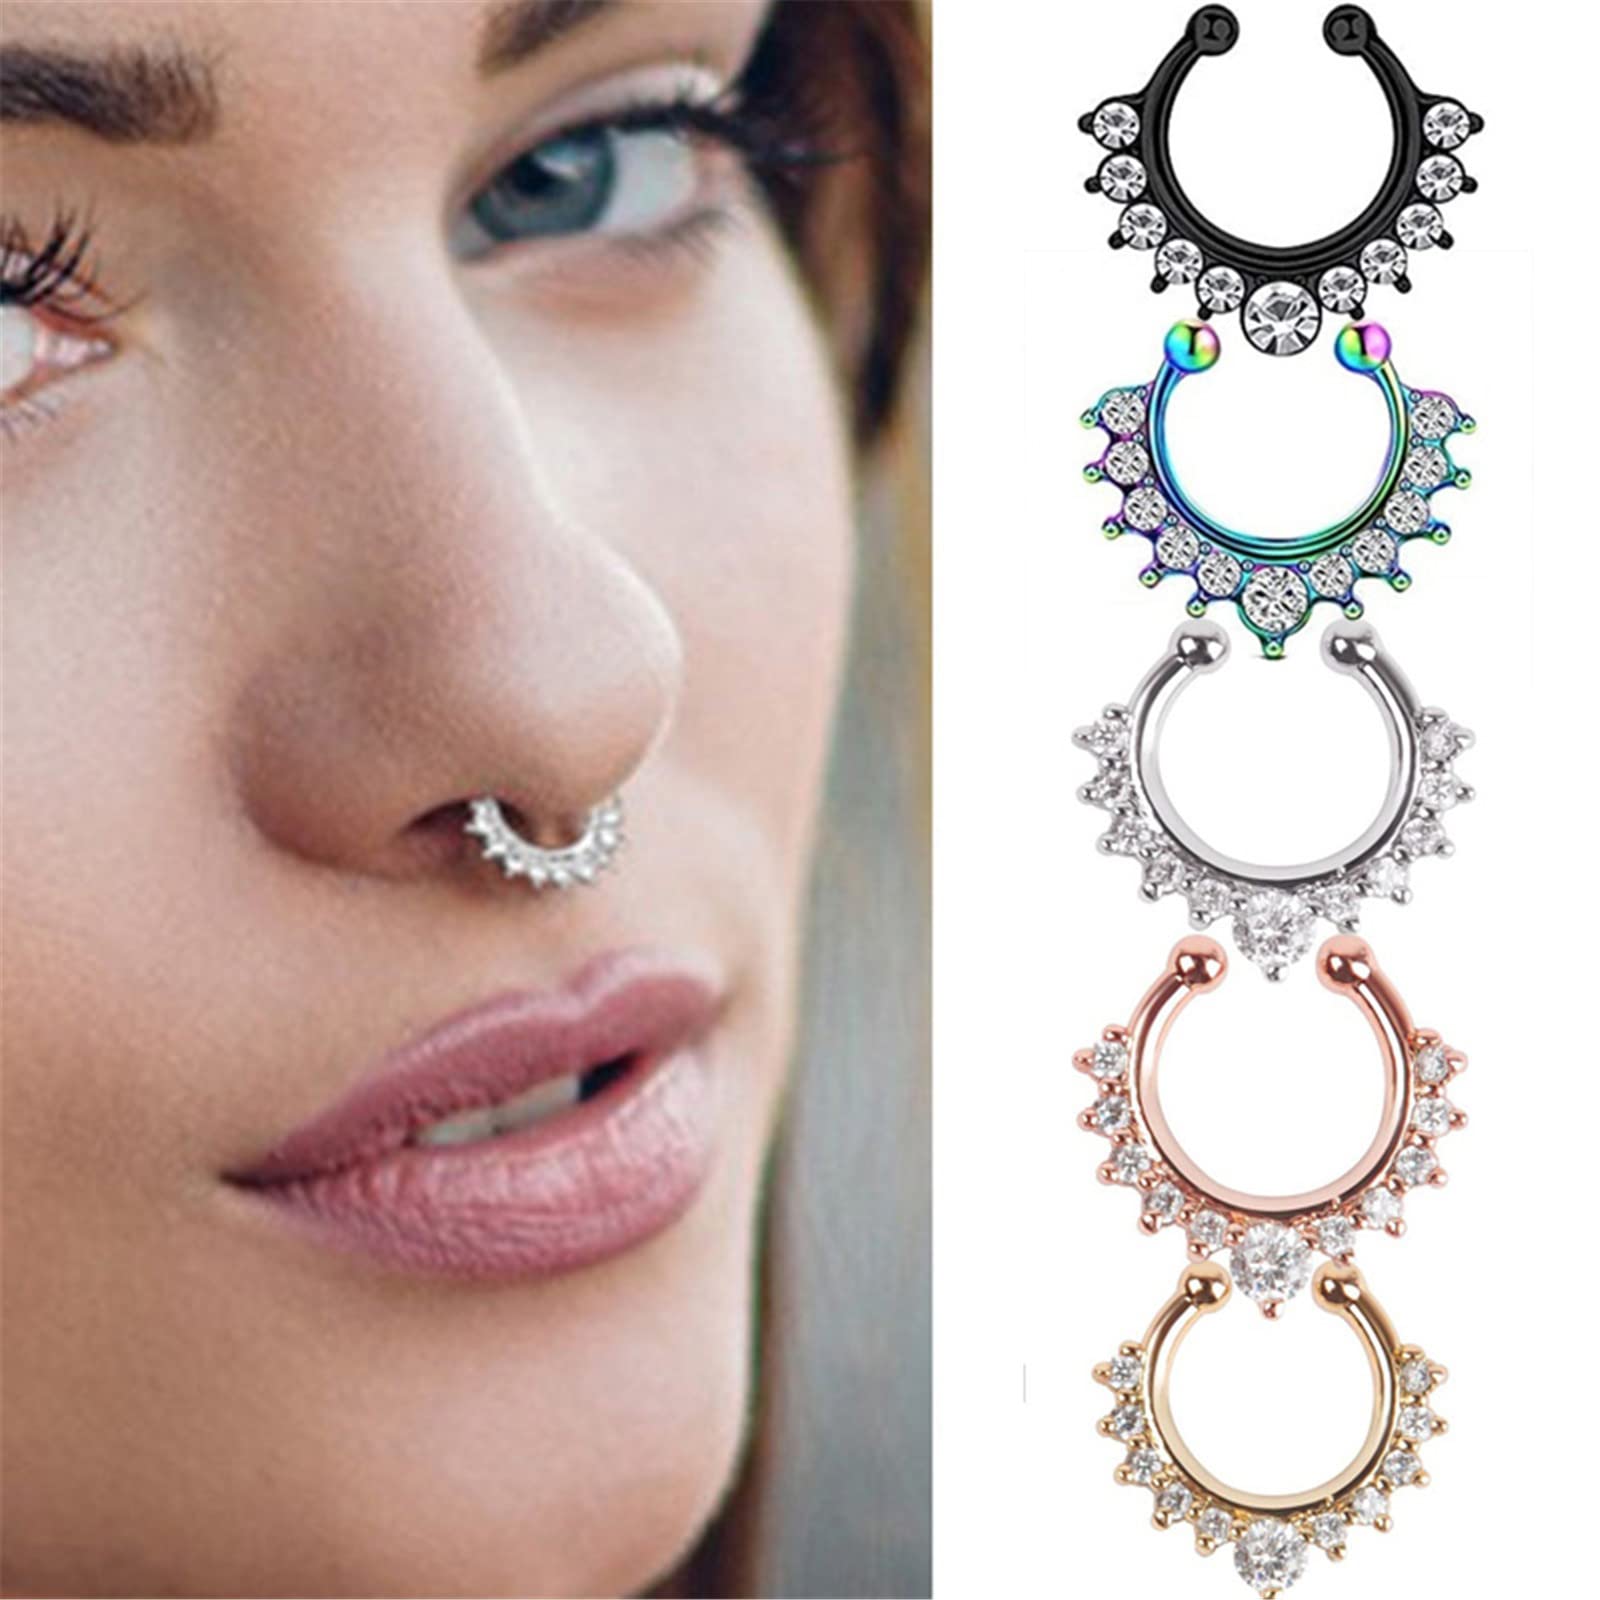 Classic Stylish Hoop Ring Nose Piercing